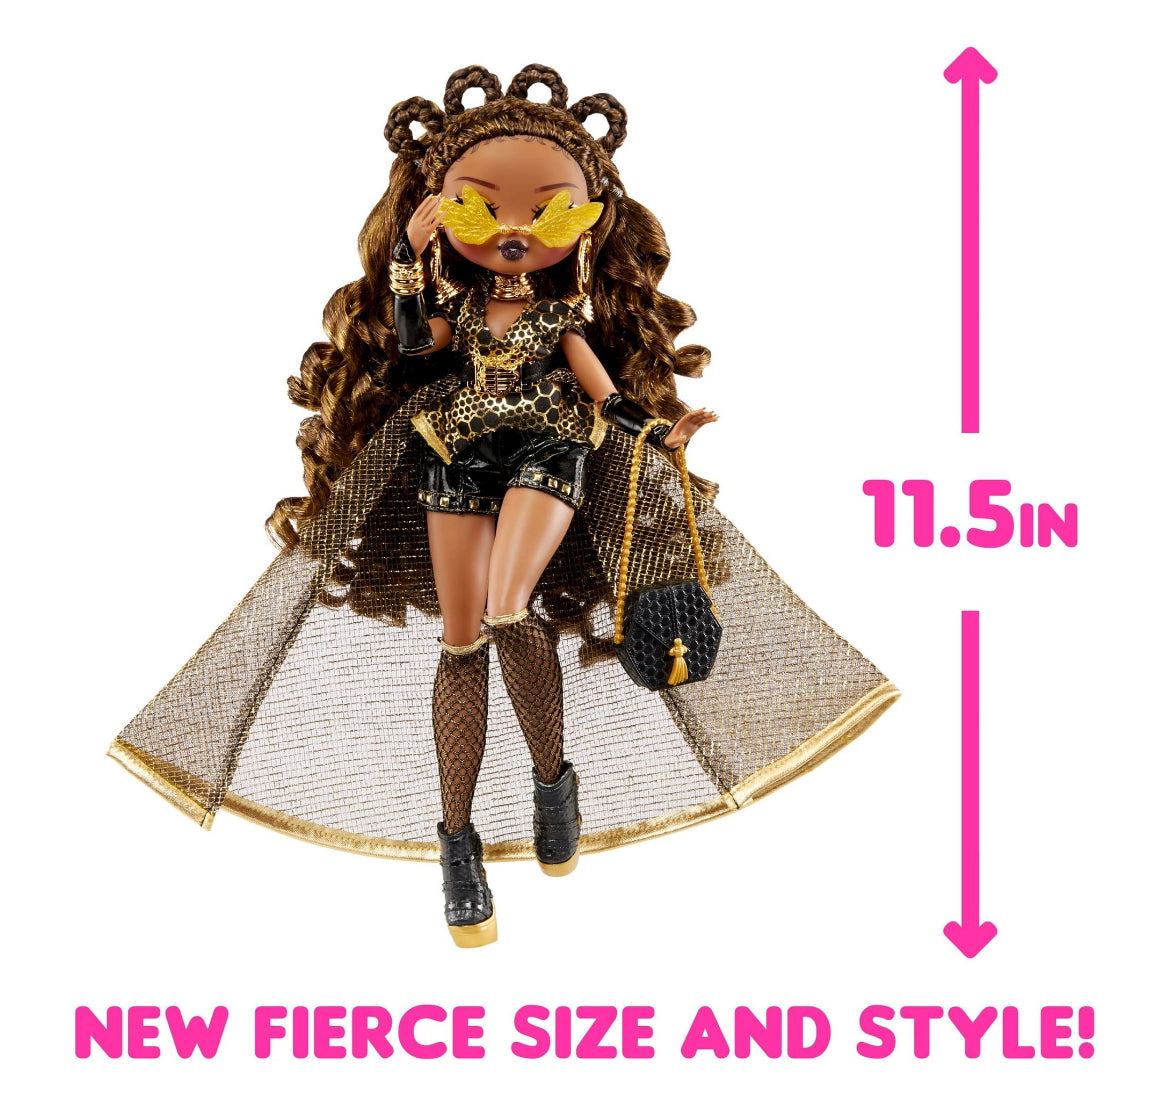 LOL Surprise OMG Fierce Royal Bee Fashion Doll with 15 Surprises 58525